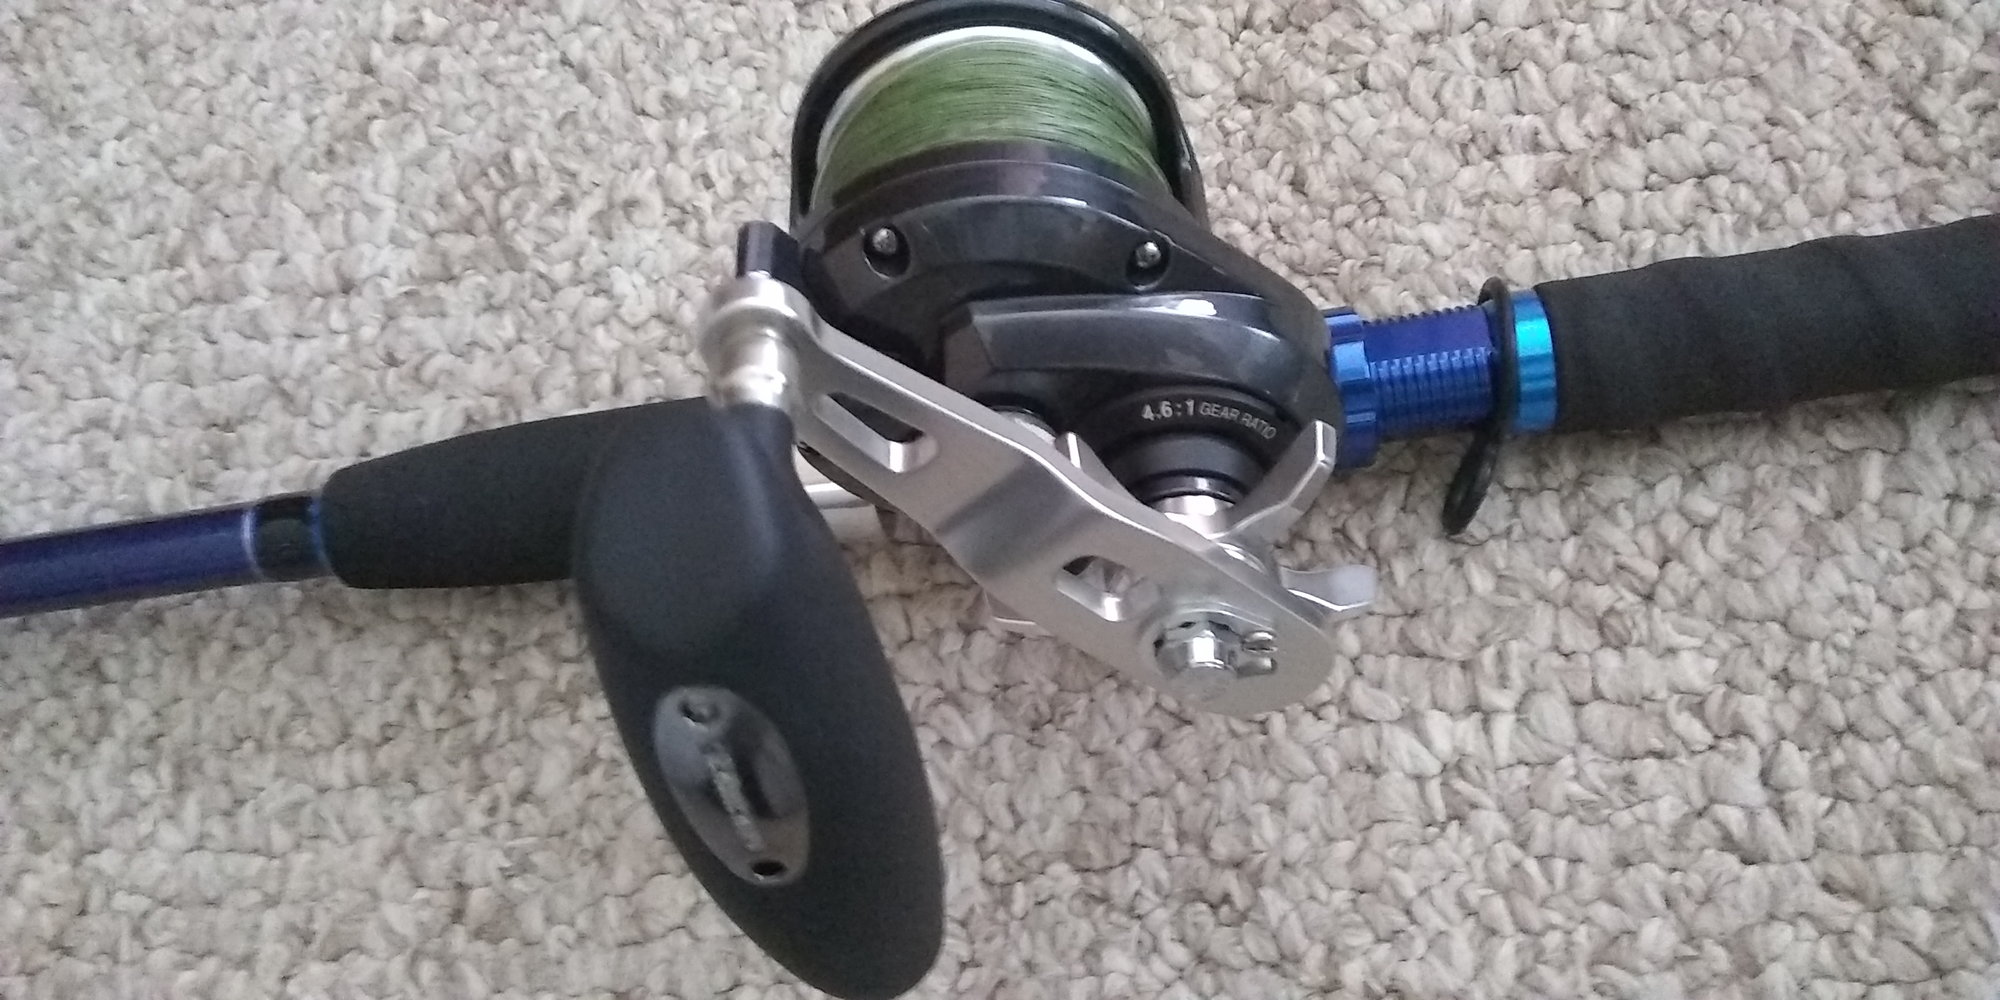 Best bottom fishing reels/rods - The Hull Truth - Boating and Fishing Forum